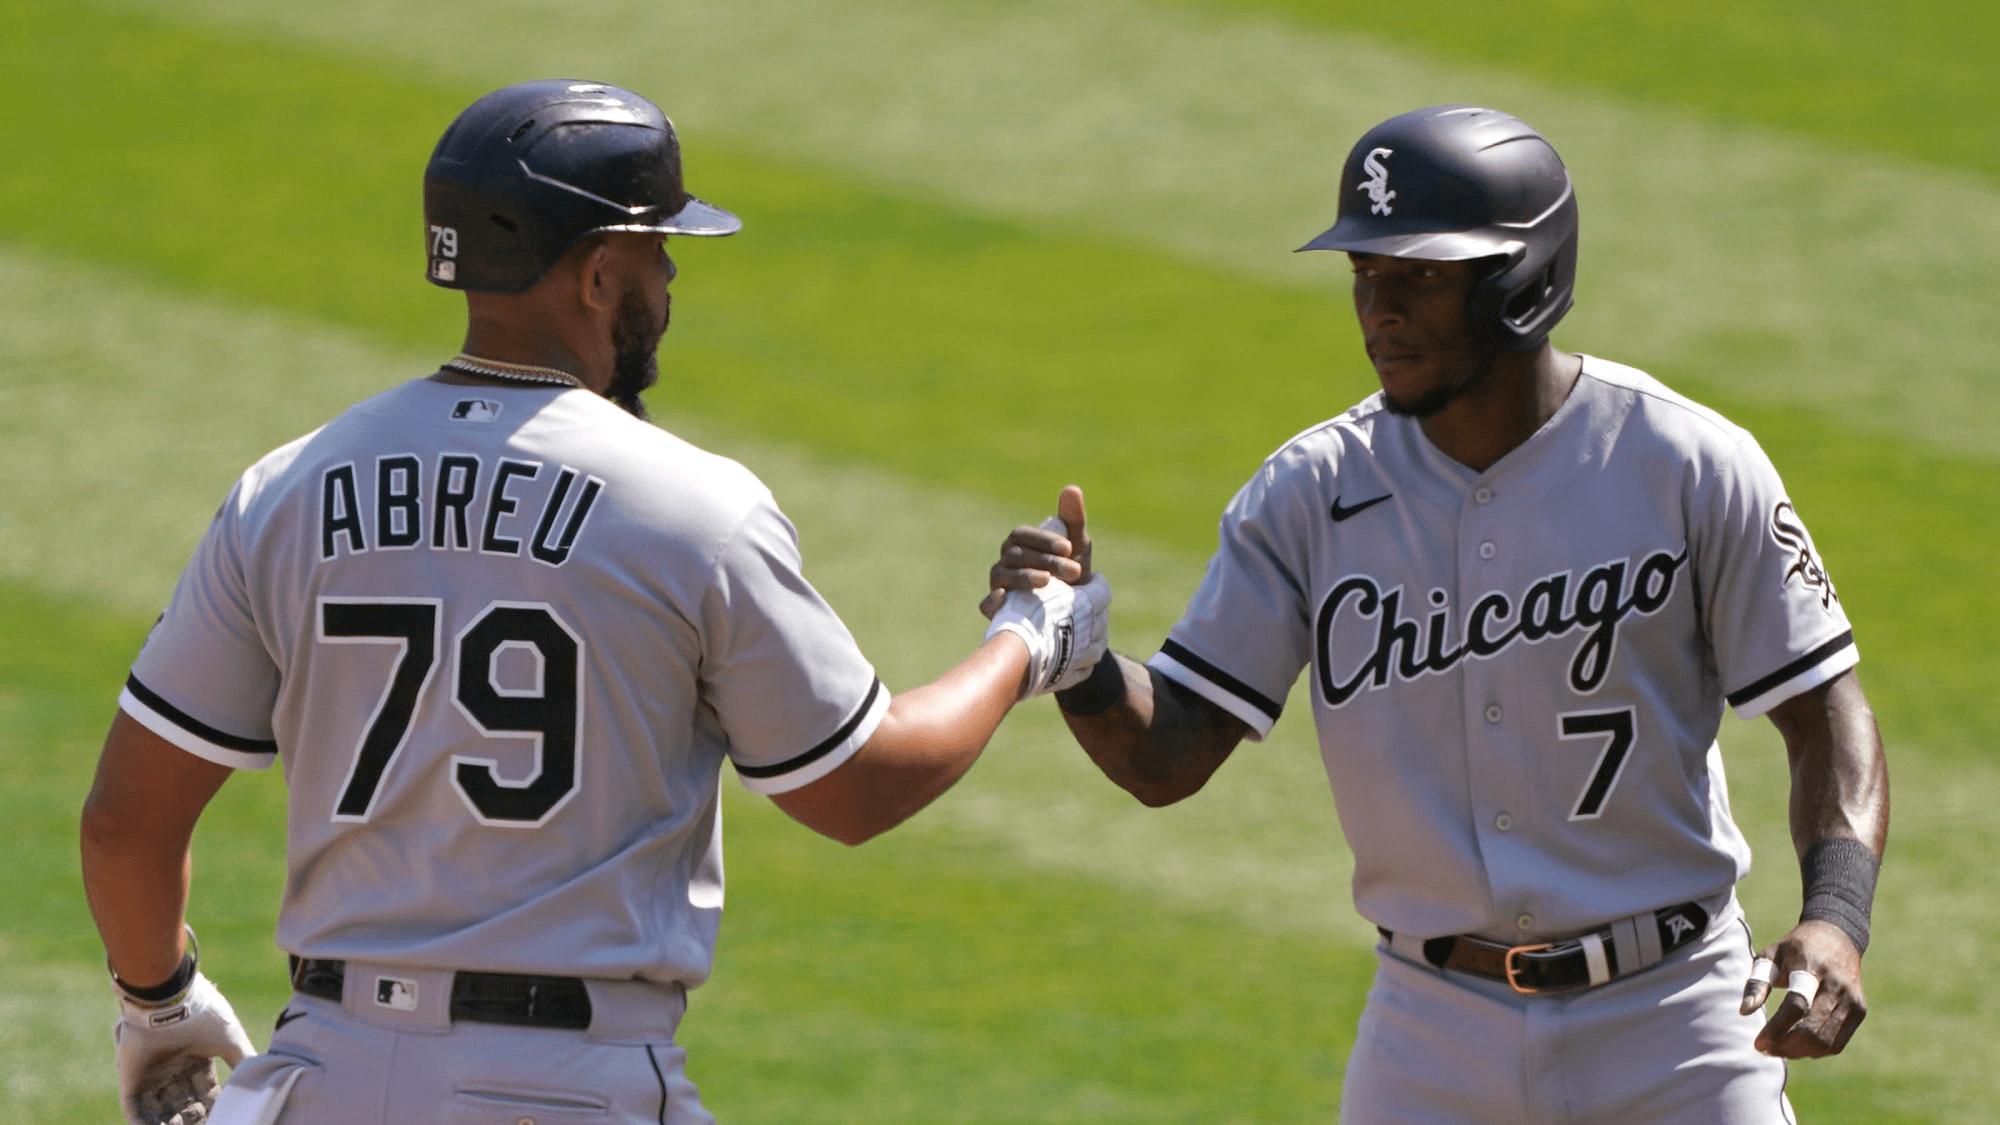 2021 American League Central Preview: Big-Hitting White Sox and Twins to Battle It Out for Central Title